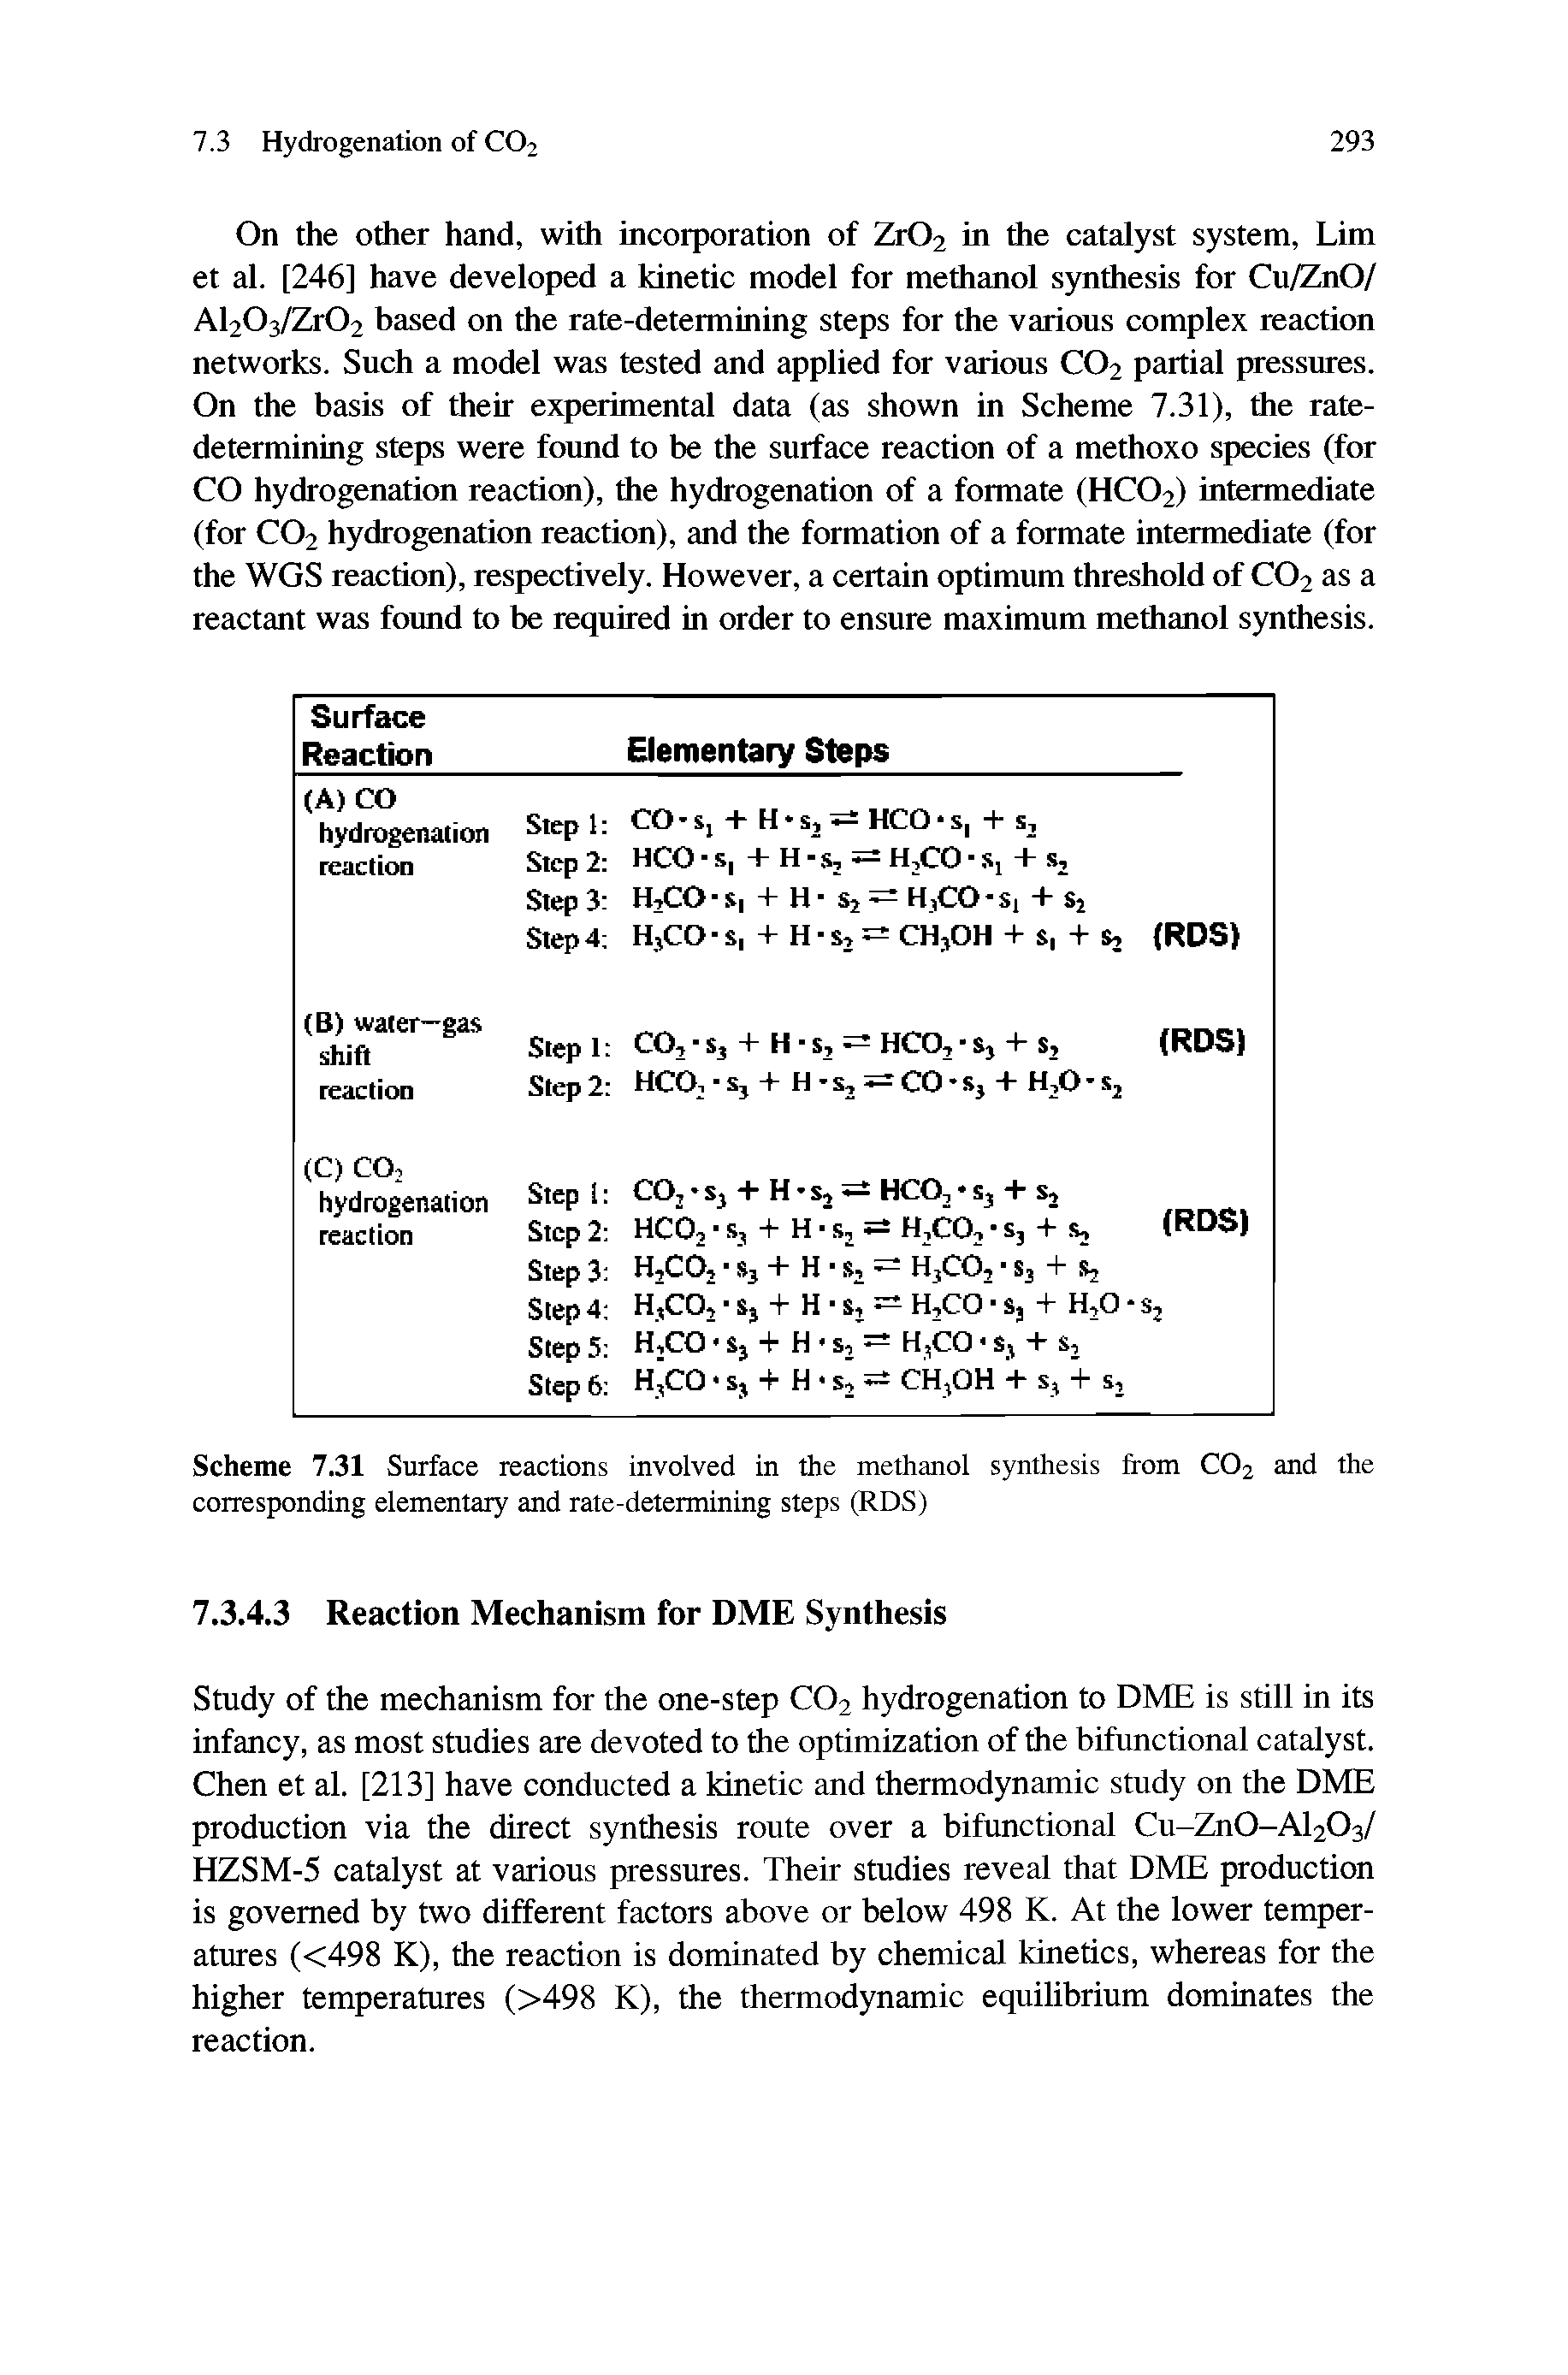 Scheme 7.31 Surface reactions involved in the methanol synthesis from CO2 and the corresponding elementary and rate-determining steps (RDS)...